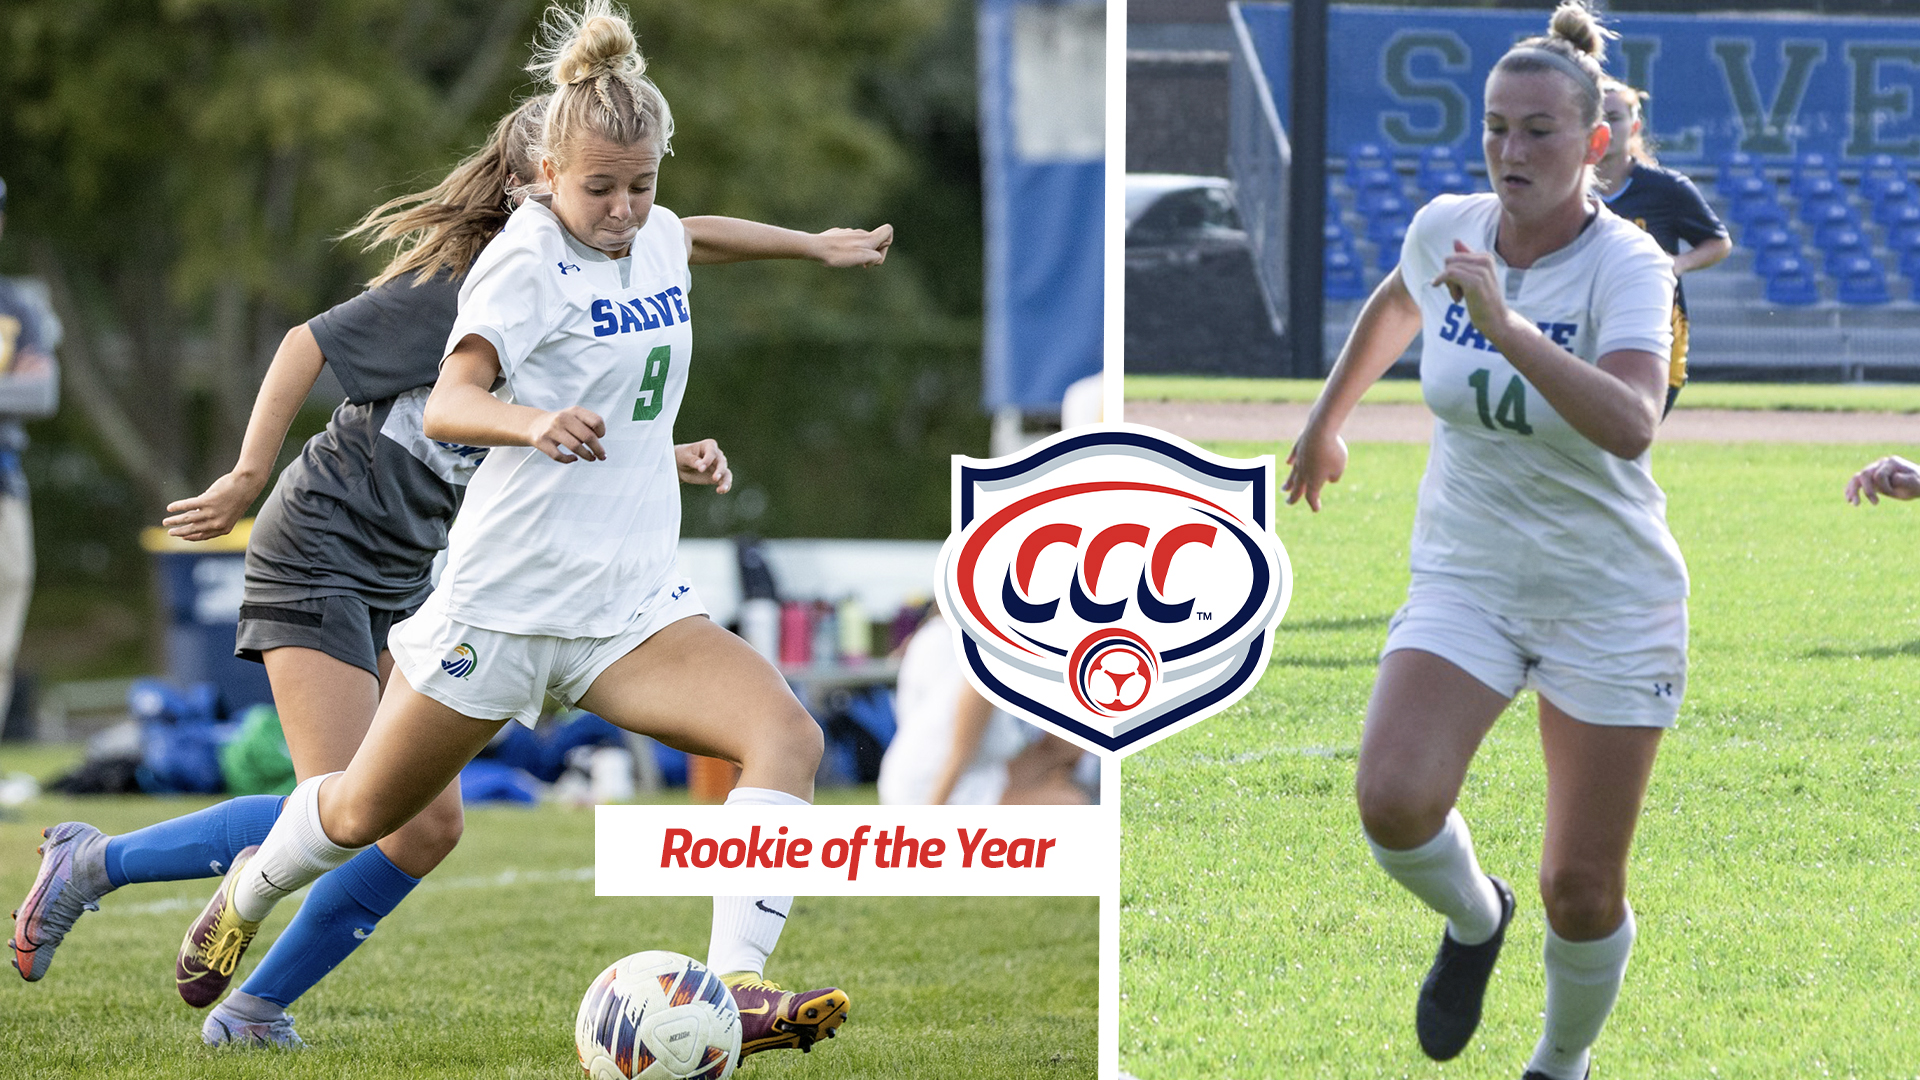 Hannah Daniewicz was named Rookie of the Year and Olivia Pickard made third team All-CCC.